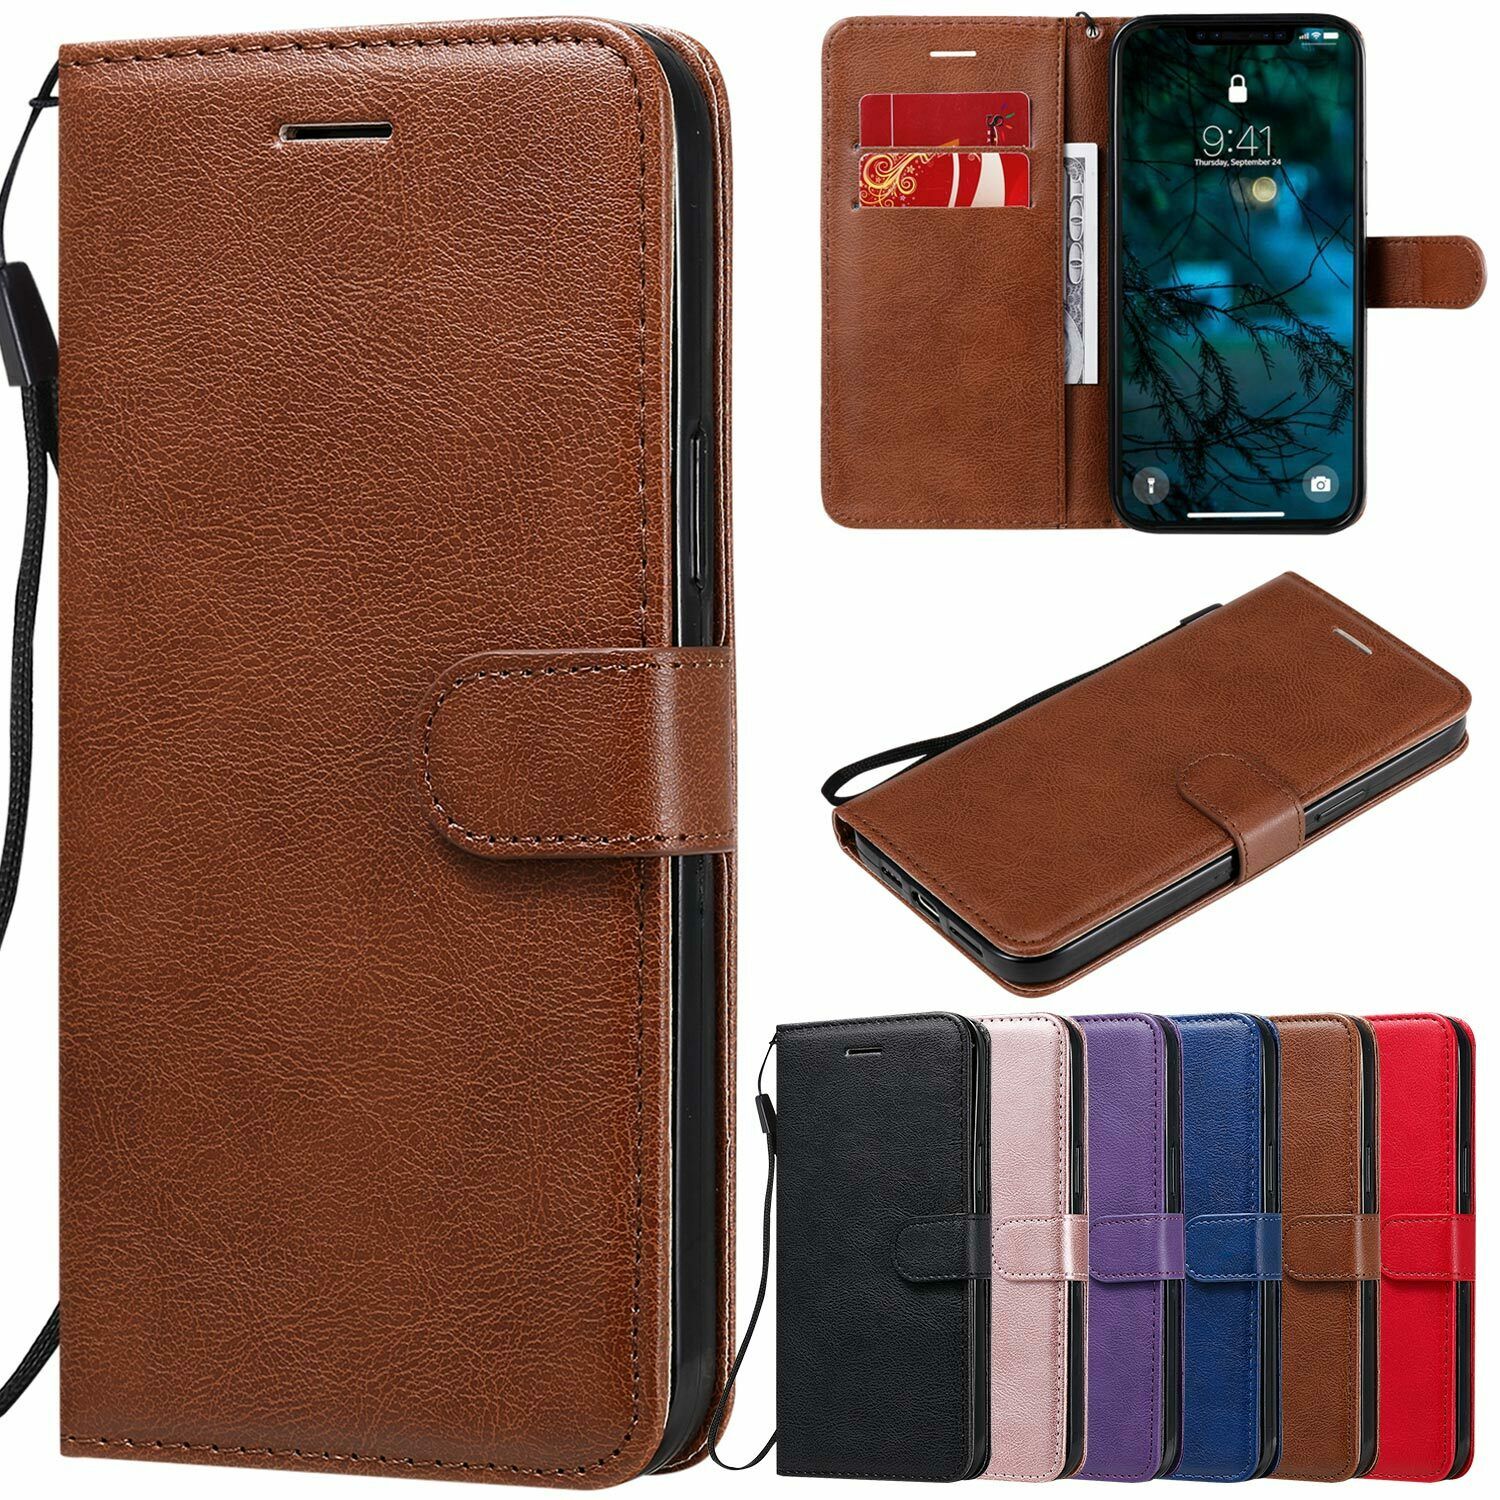 For iPhone 12 Pro Max 11 Pro XR 7 8 Plus Leather Flip Magnetic Wallet Case Cover